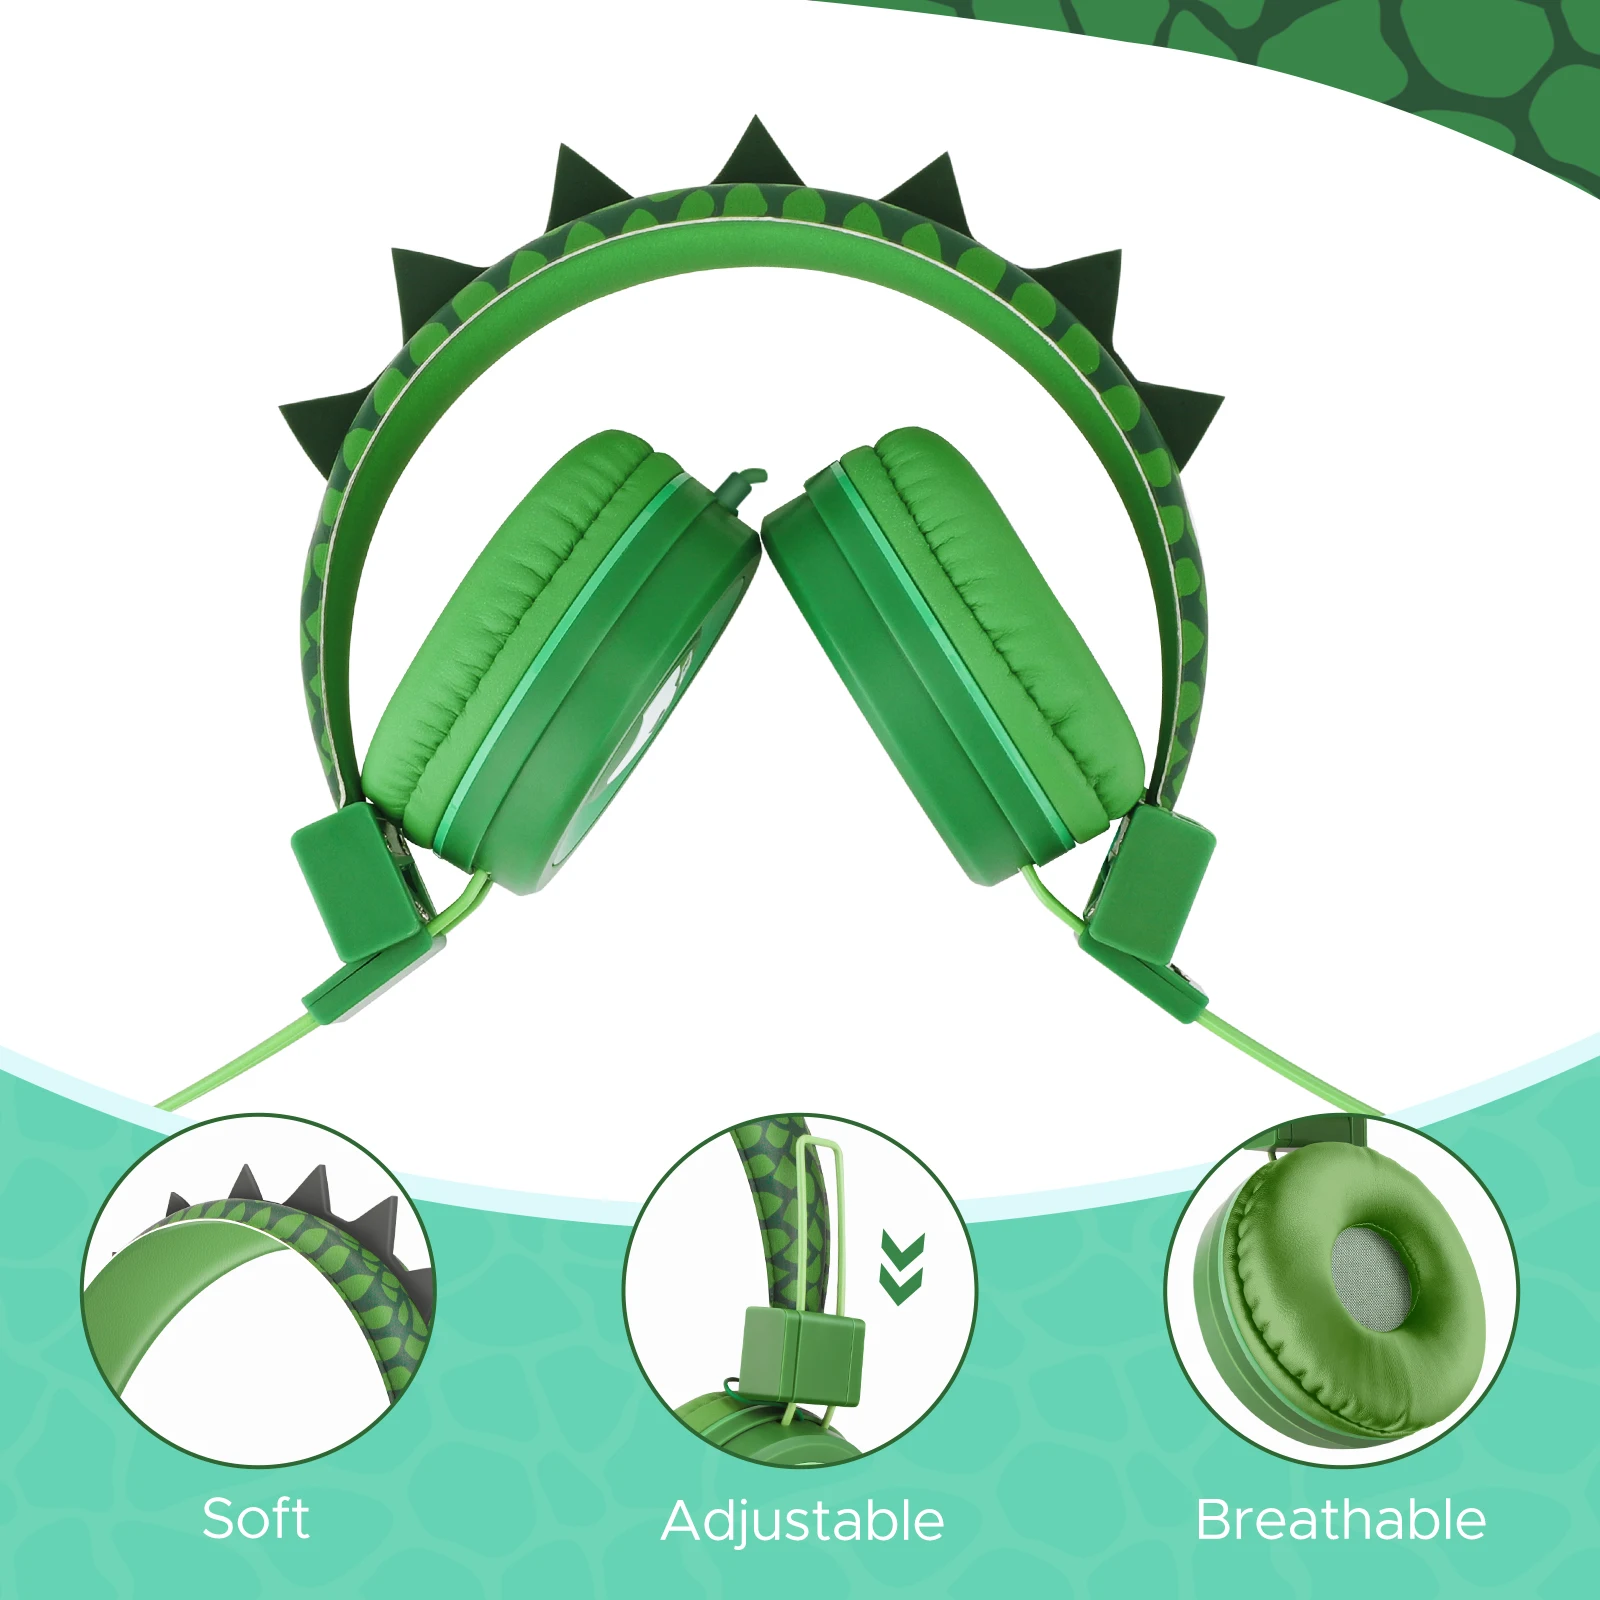 Kids Dinosaur Headphones Childrens Cute Wired for School Boys  with Microphone and 85dB Volume Limit for iPad/Kindle/Fire Tablet